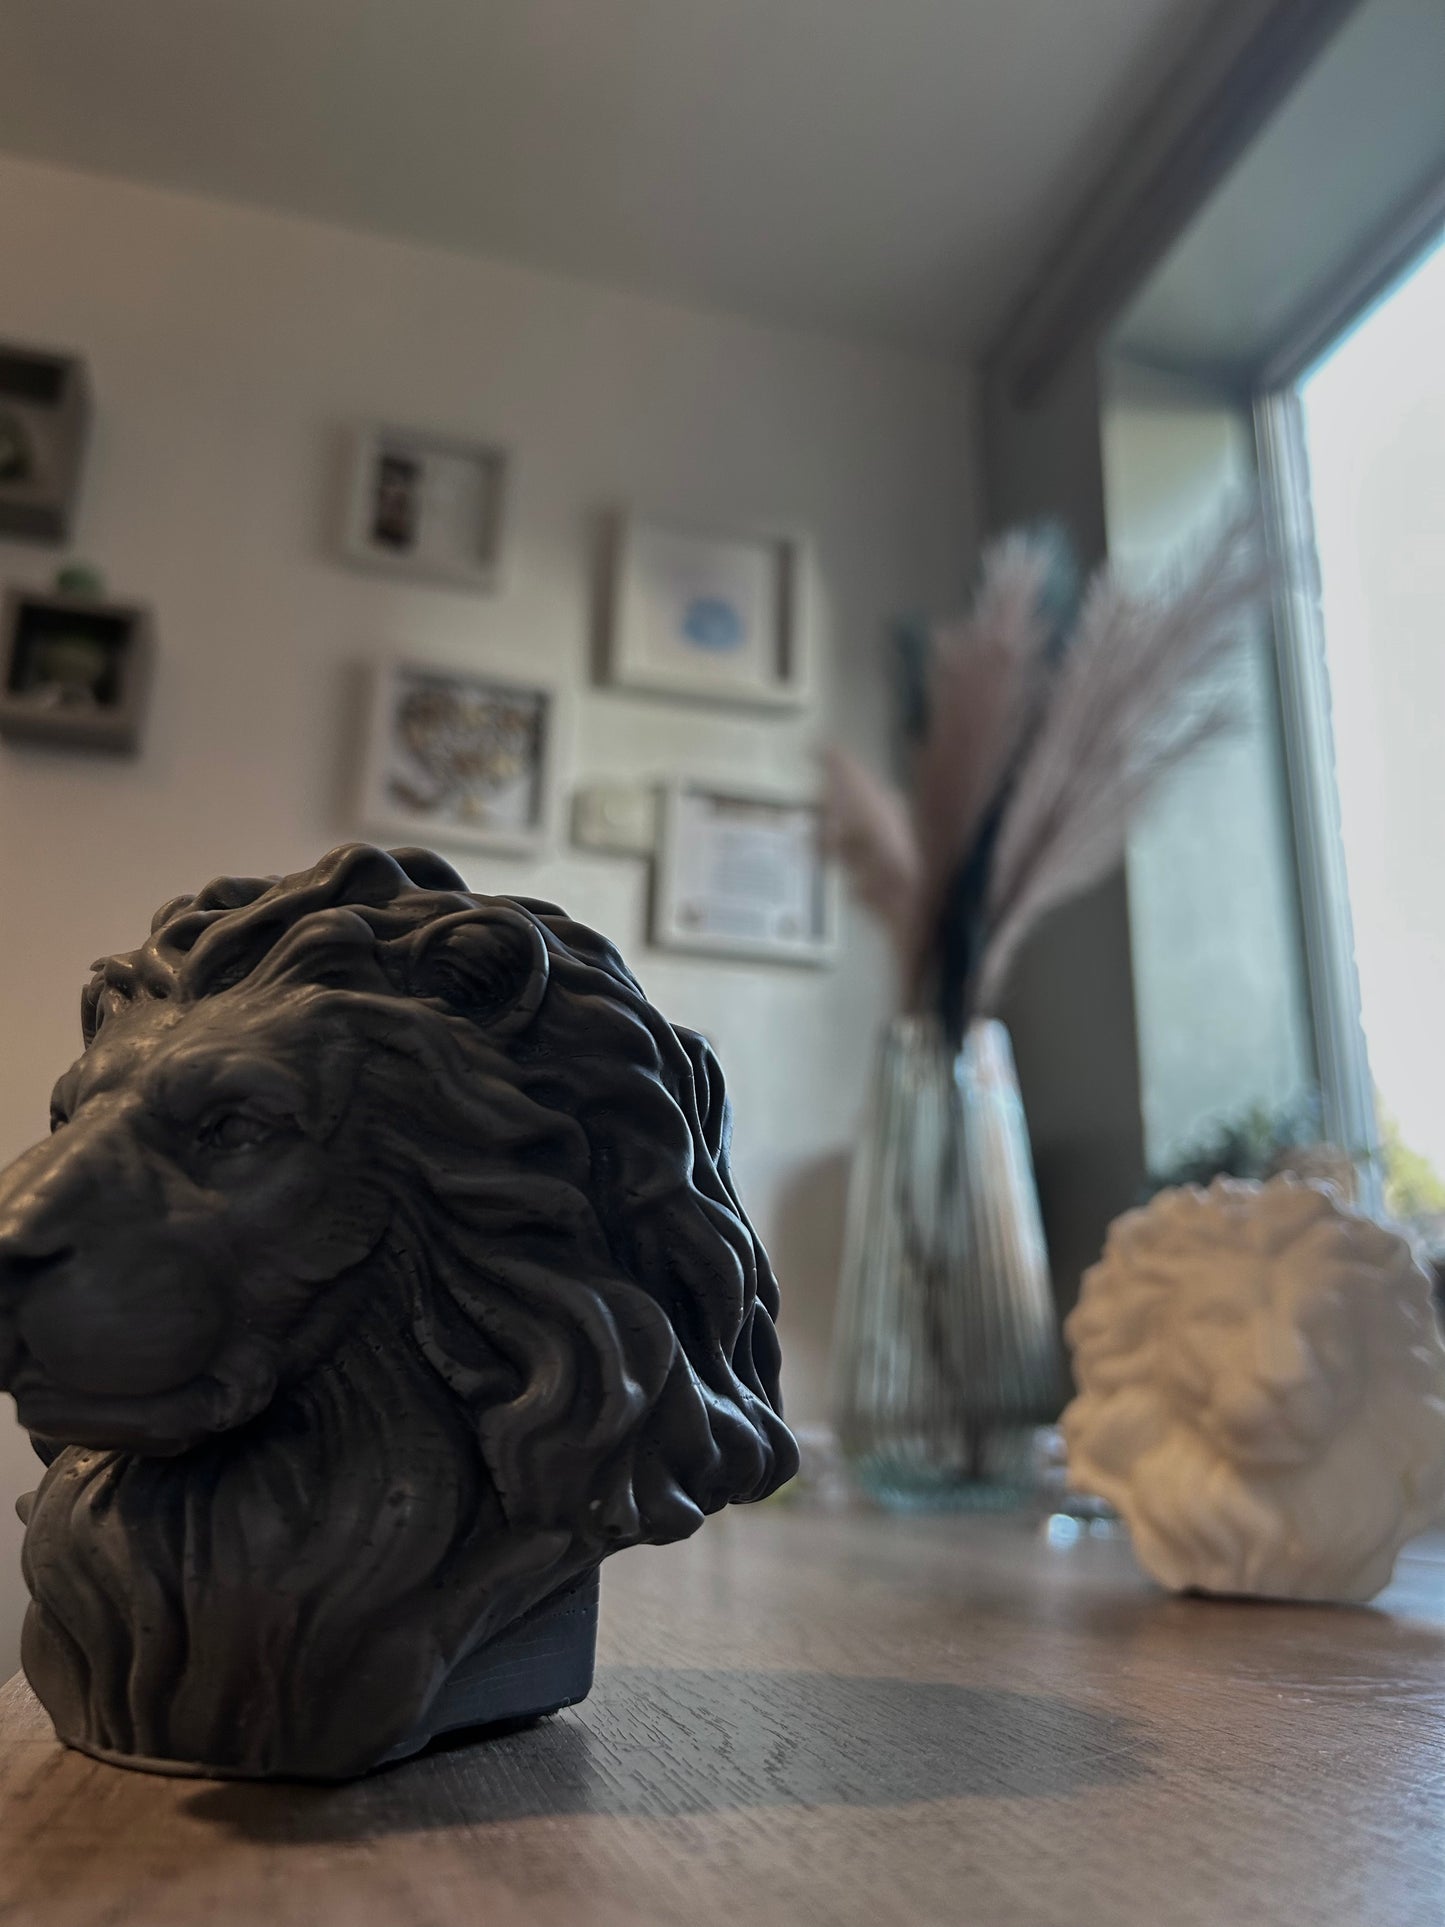 Lion Head Candle